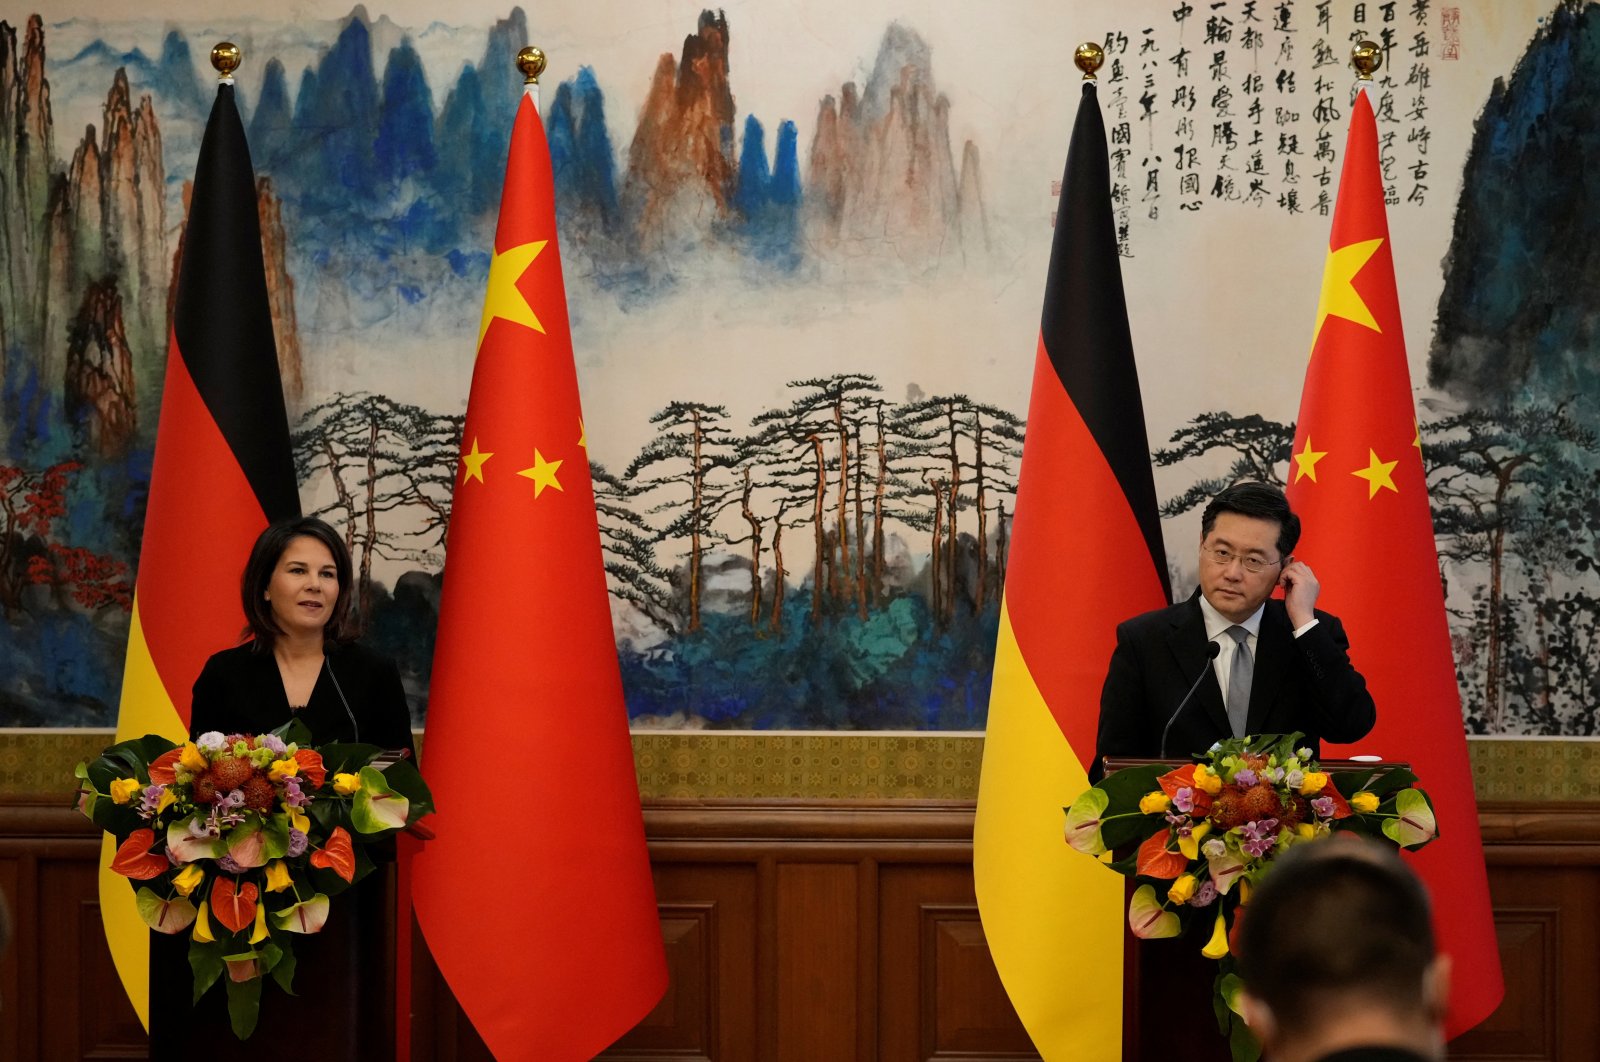 German Foreign Minister Annalena Baerbock and Chinese Foreign Minister Qin Gang attend a joint press conference at the Diaoyutai State Guesthouse in Beijing, China, April 14, 2023. (Reuters Photo)